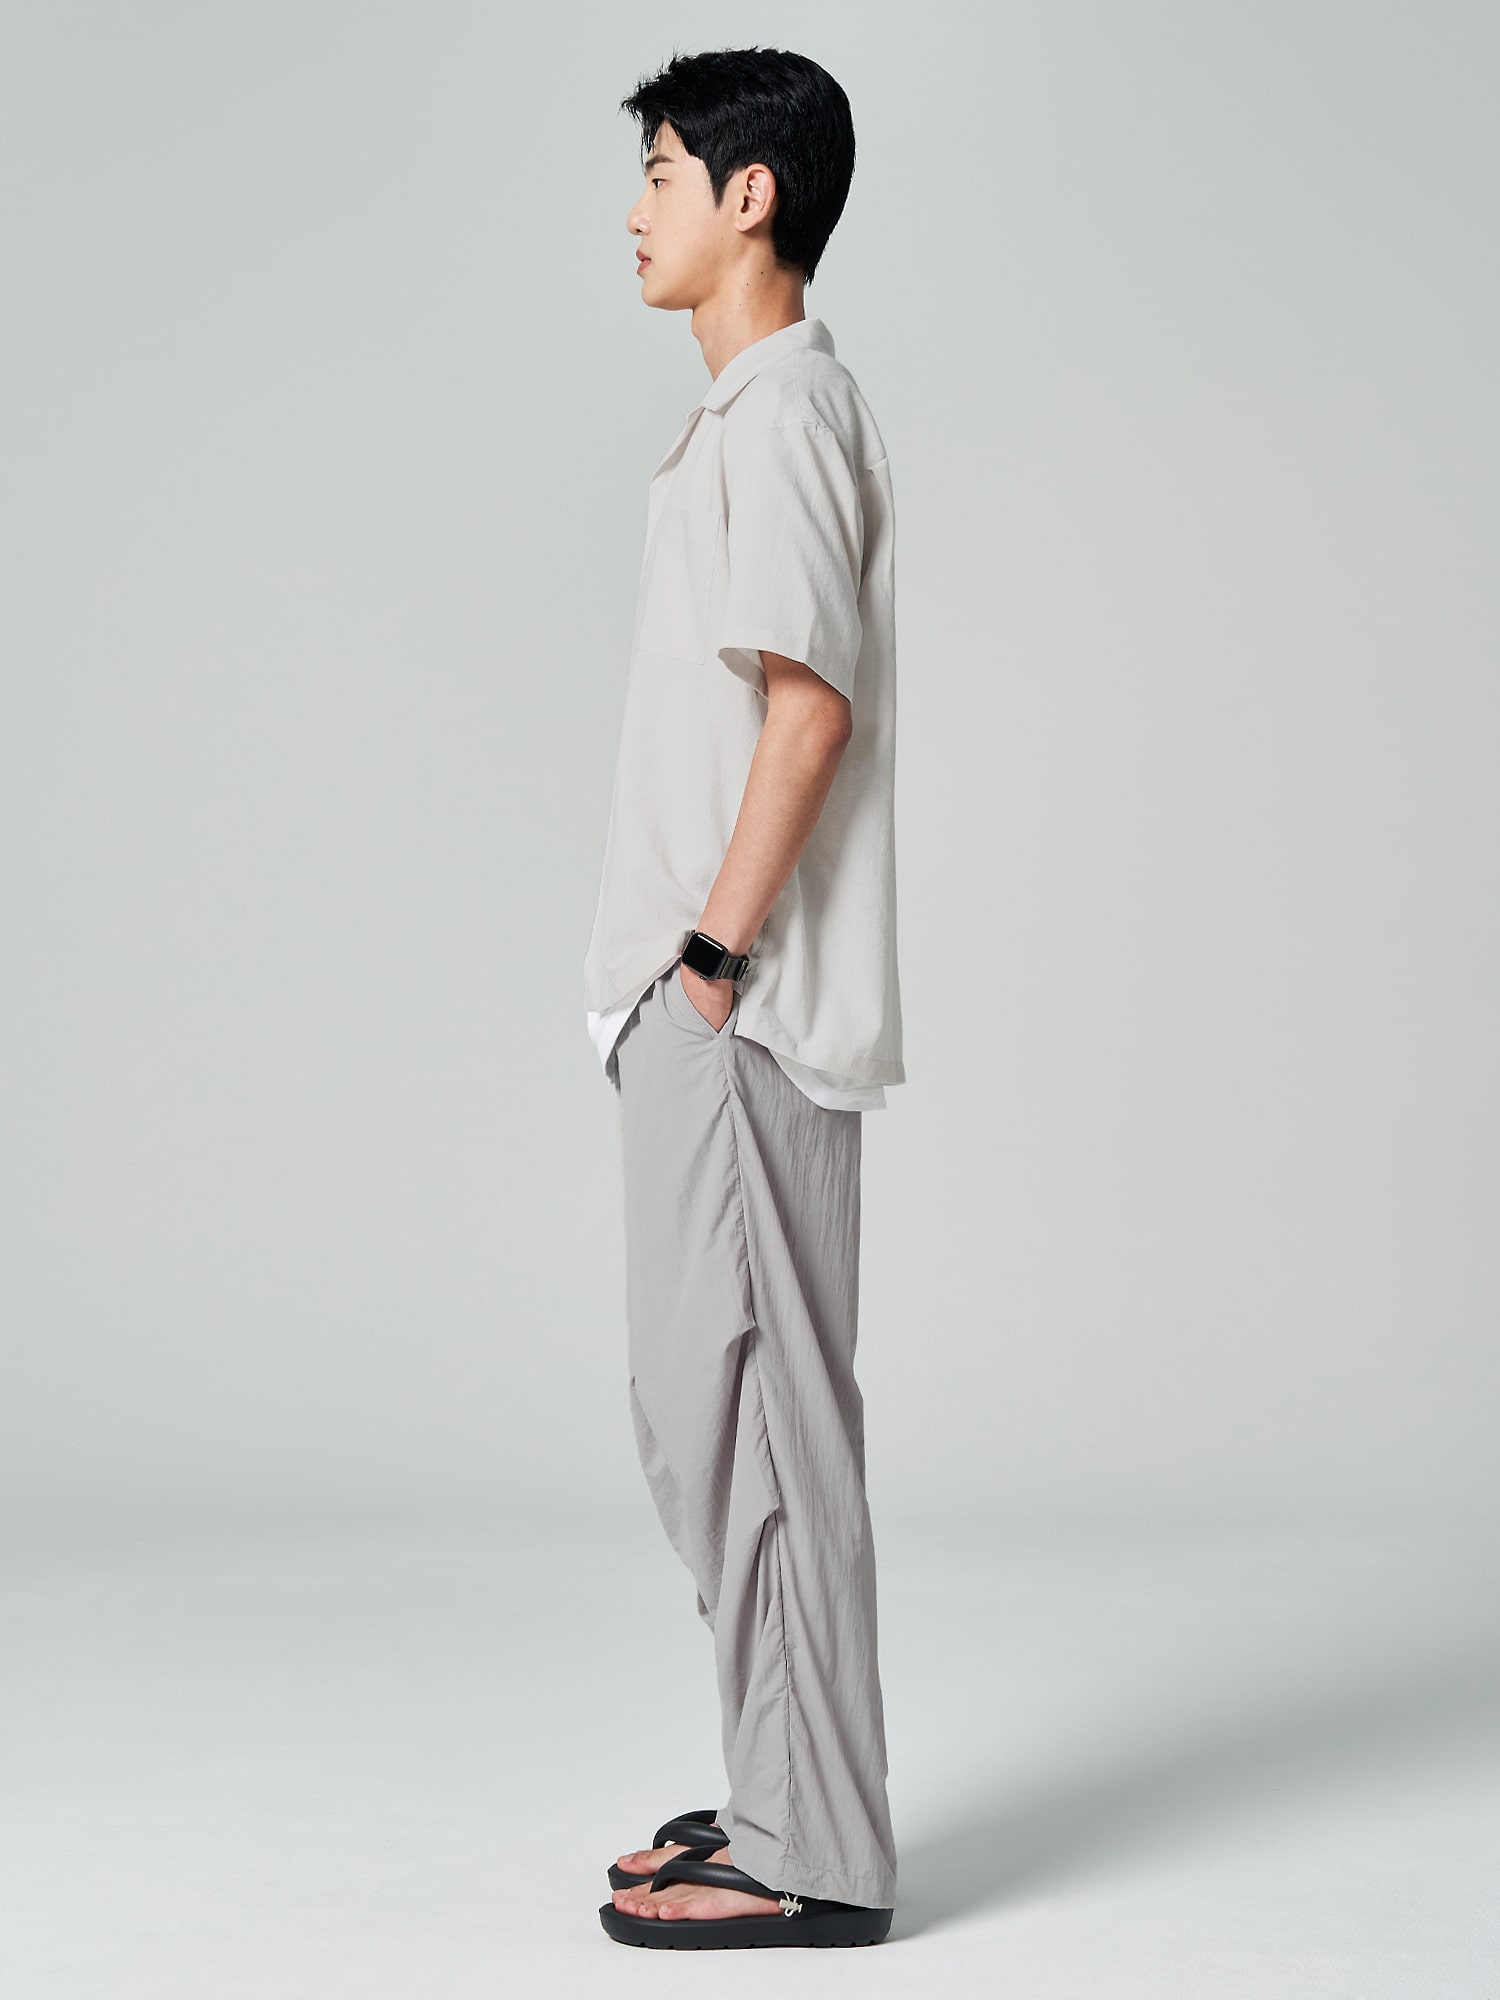 PARACHUTE PANTS IN GRAY – HSO